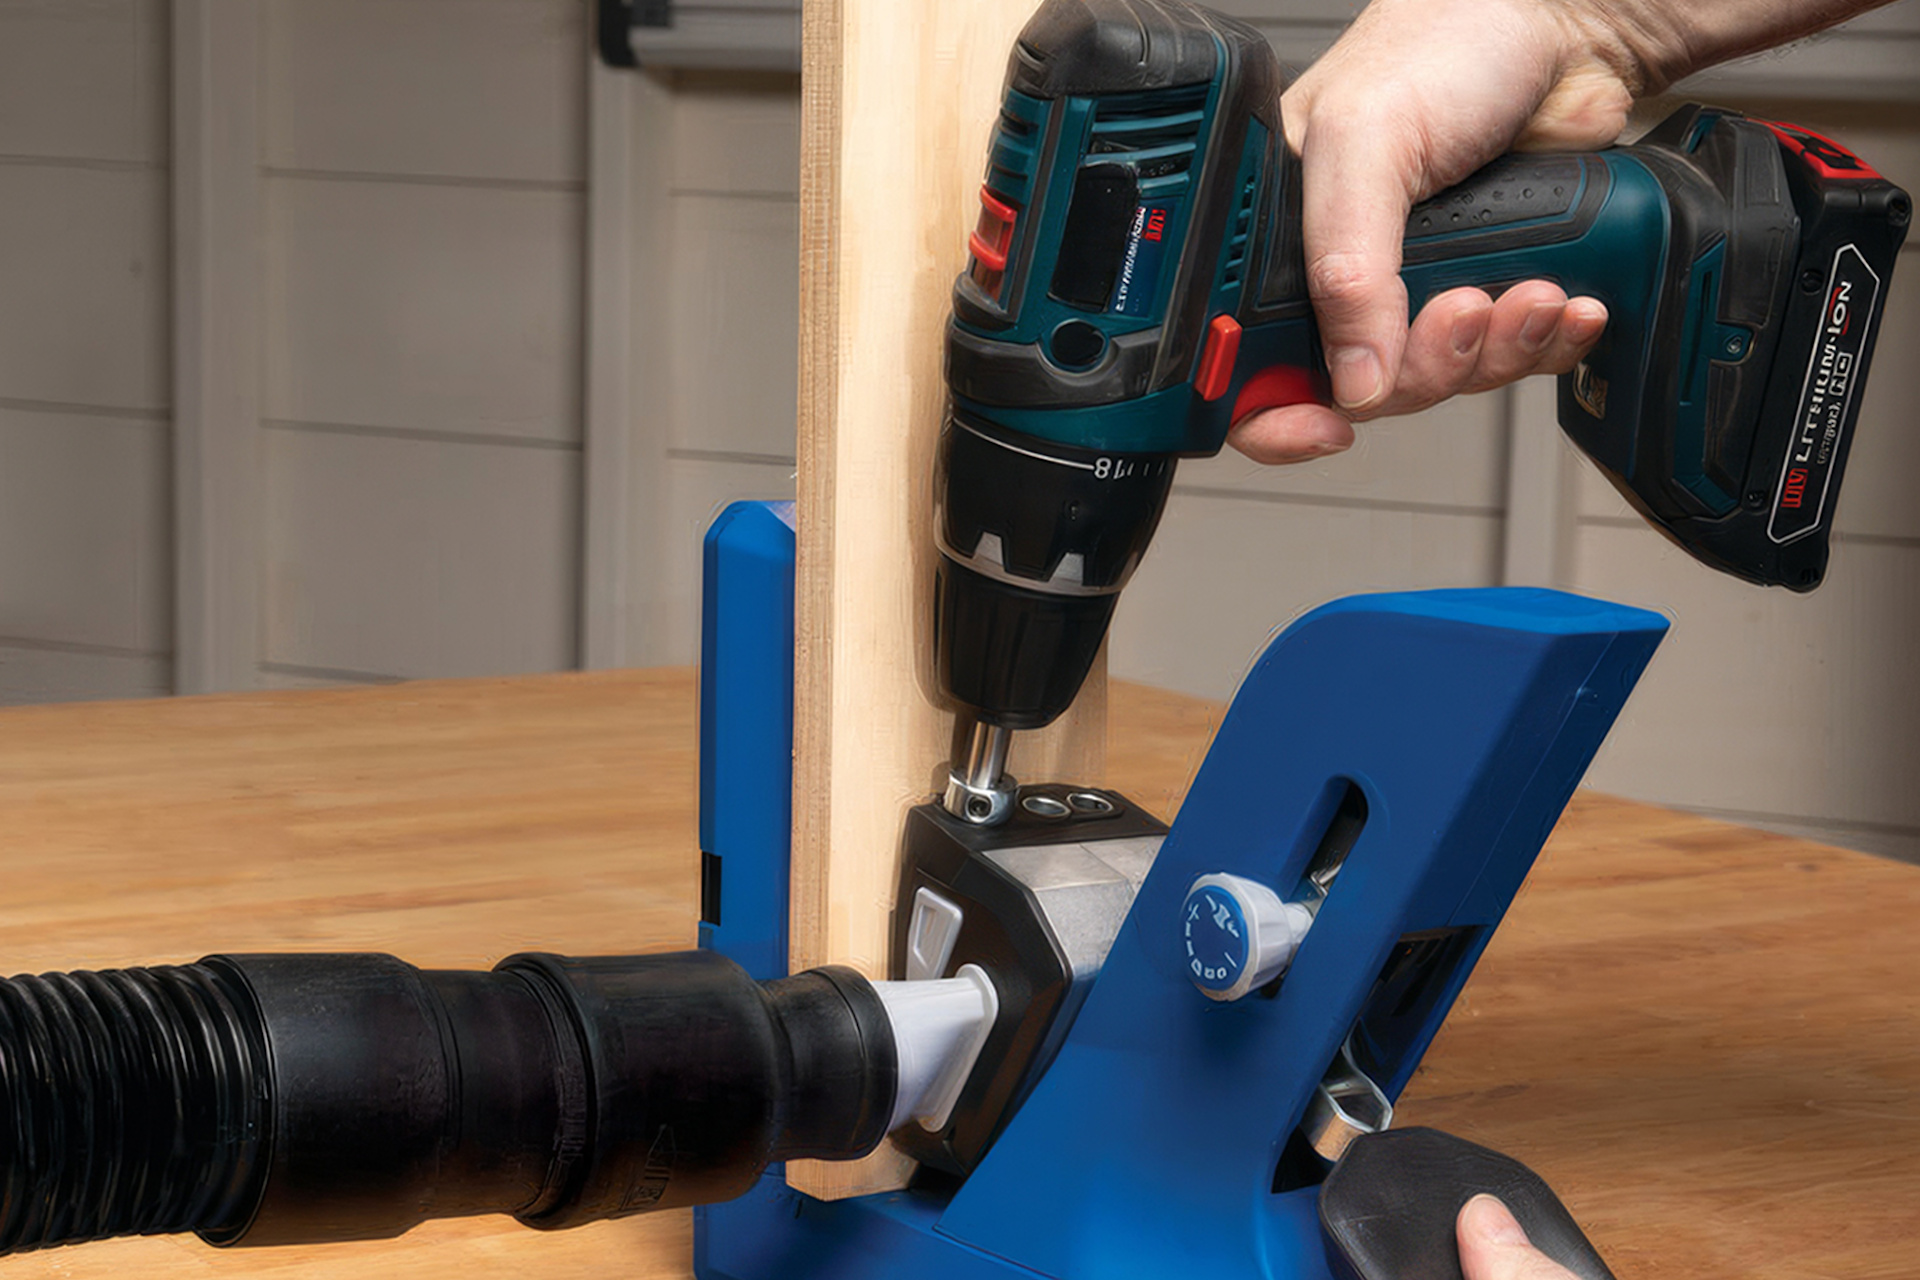 Hands hold a drill against a slat of wood in a blue securing device in this image for a Meltwater customer story about the Kreg Tool Company.